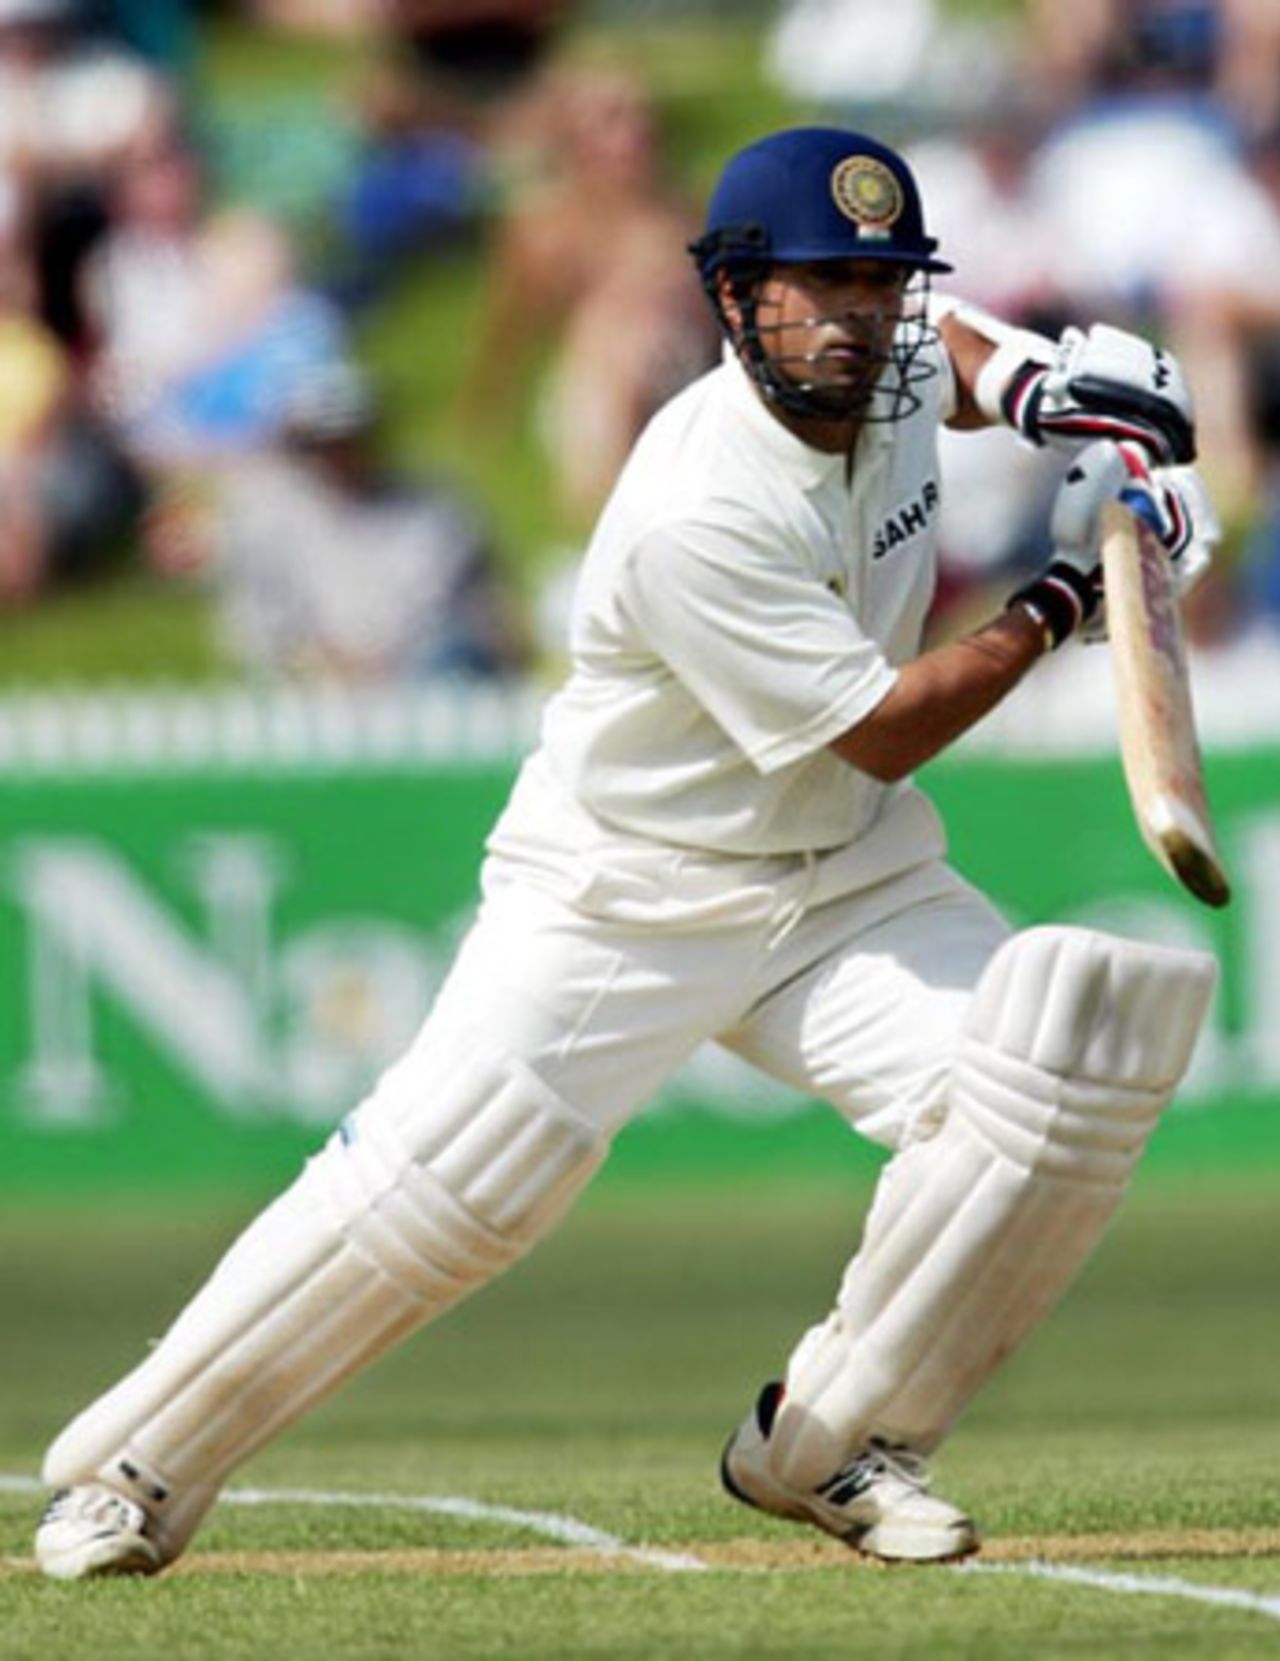 Indian batsman Sachin Tendulkar drives a delivery through the covers during his second innings of 32. 2nd Test: New Zealand v India at Westpac Park, Hamilton, 19-23 December 2002 (21 December 2002).